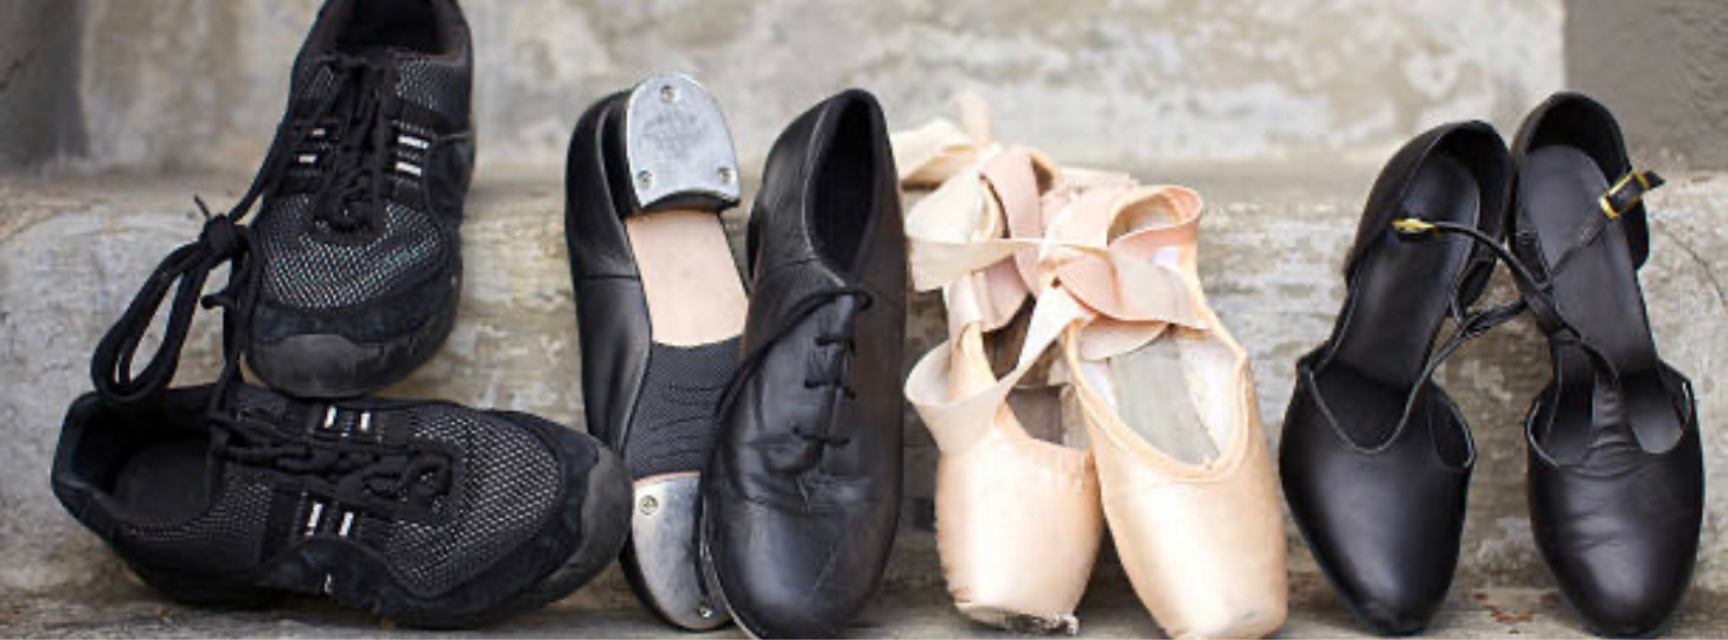 Dancing shoes of all different varieties laid out on a stone step